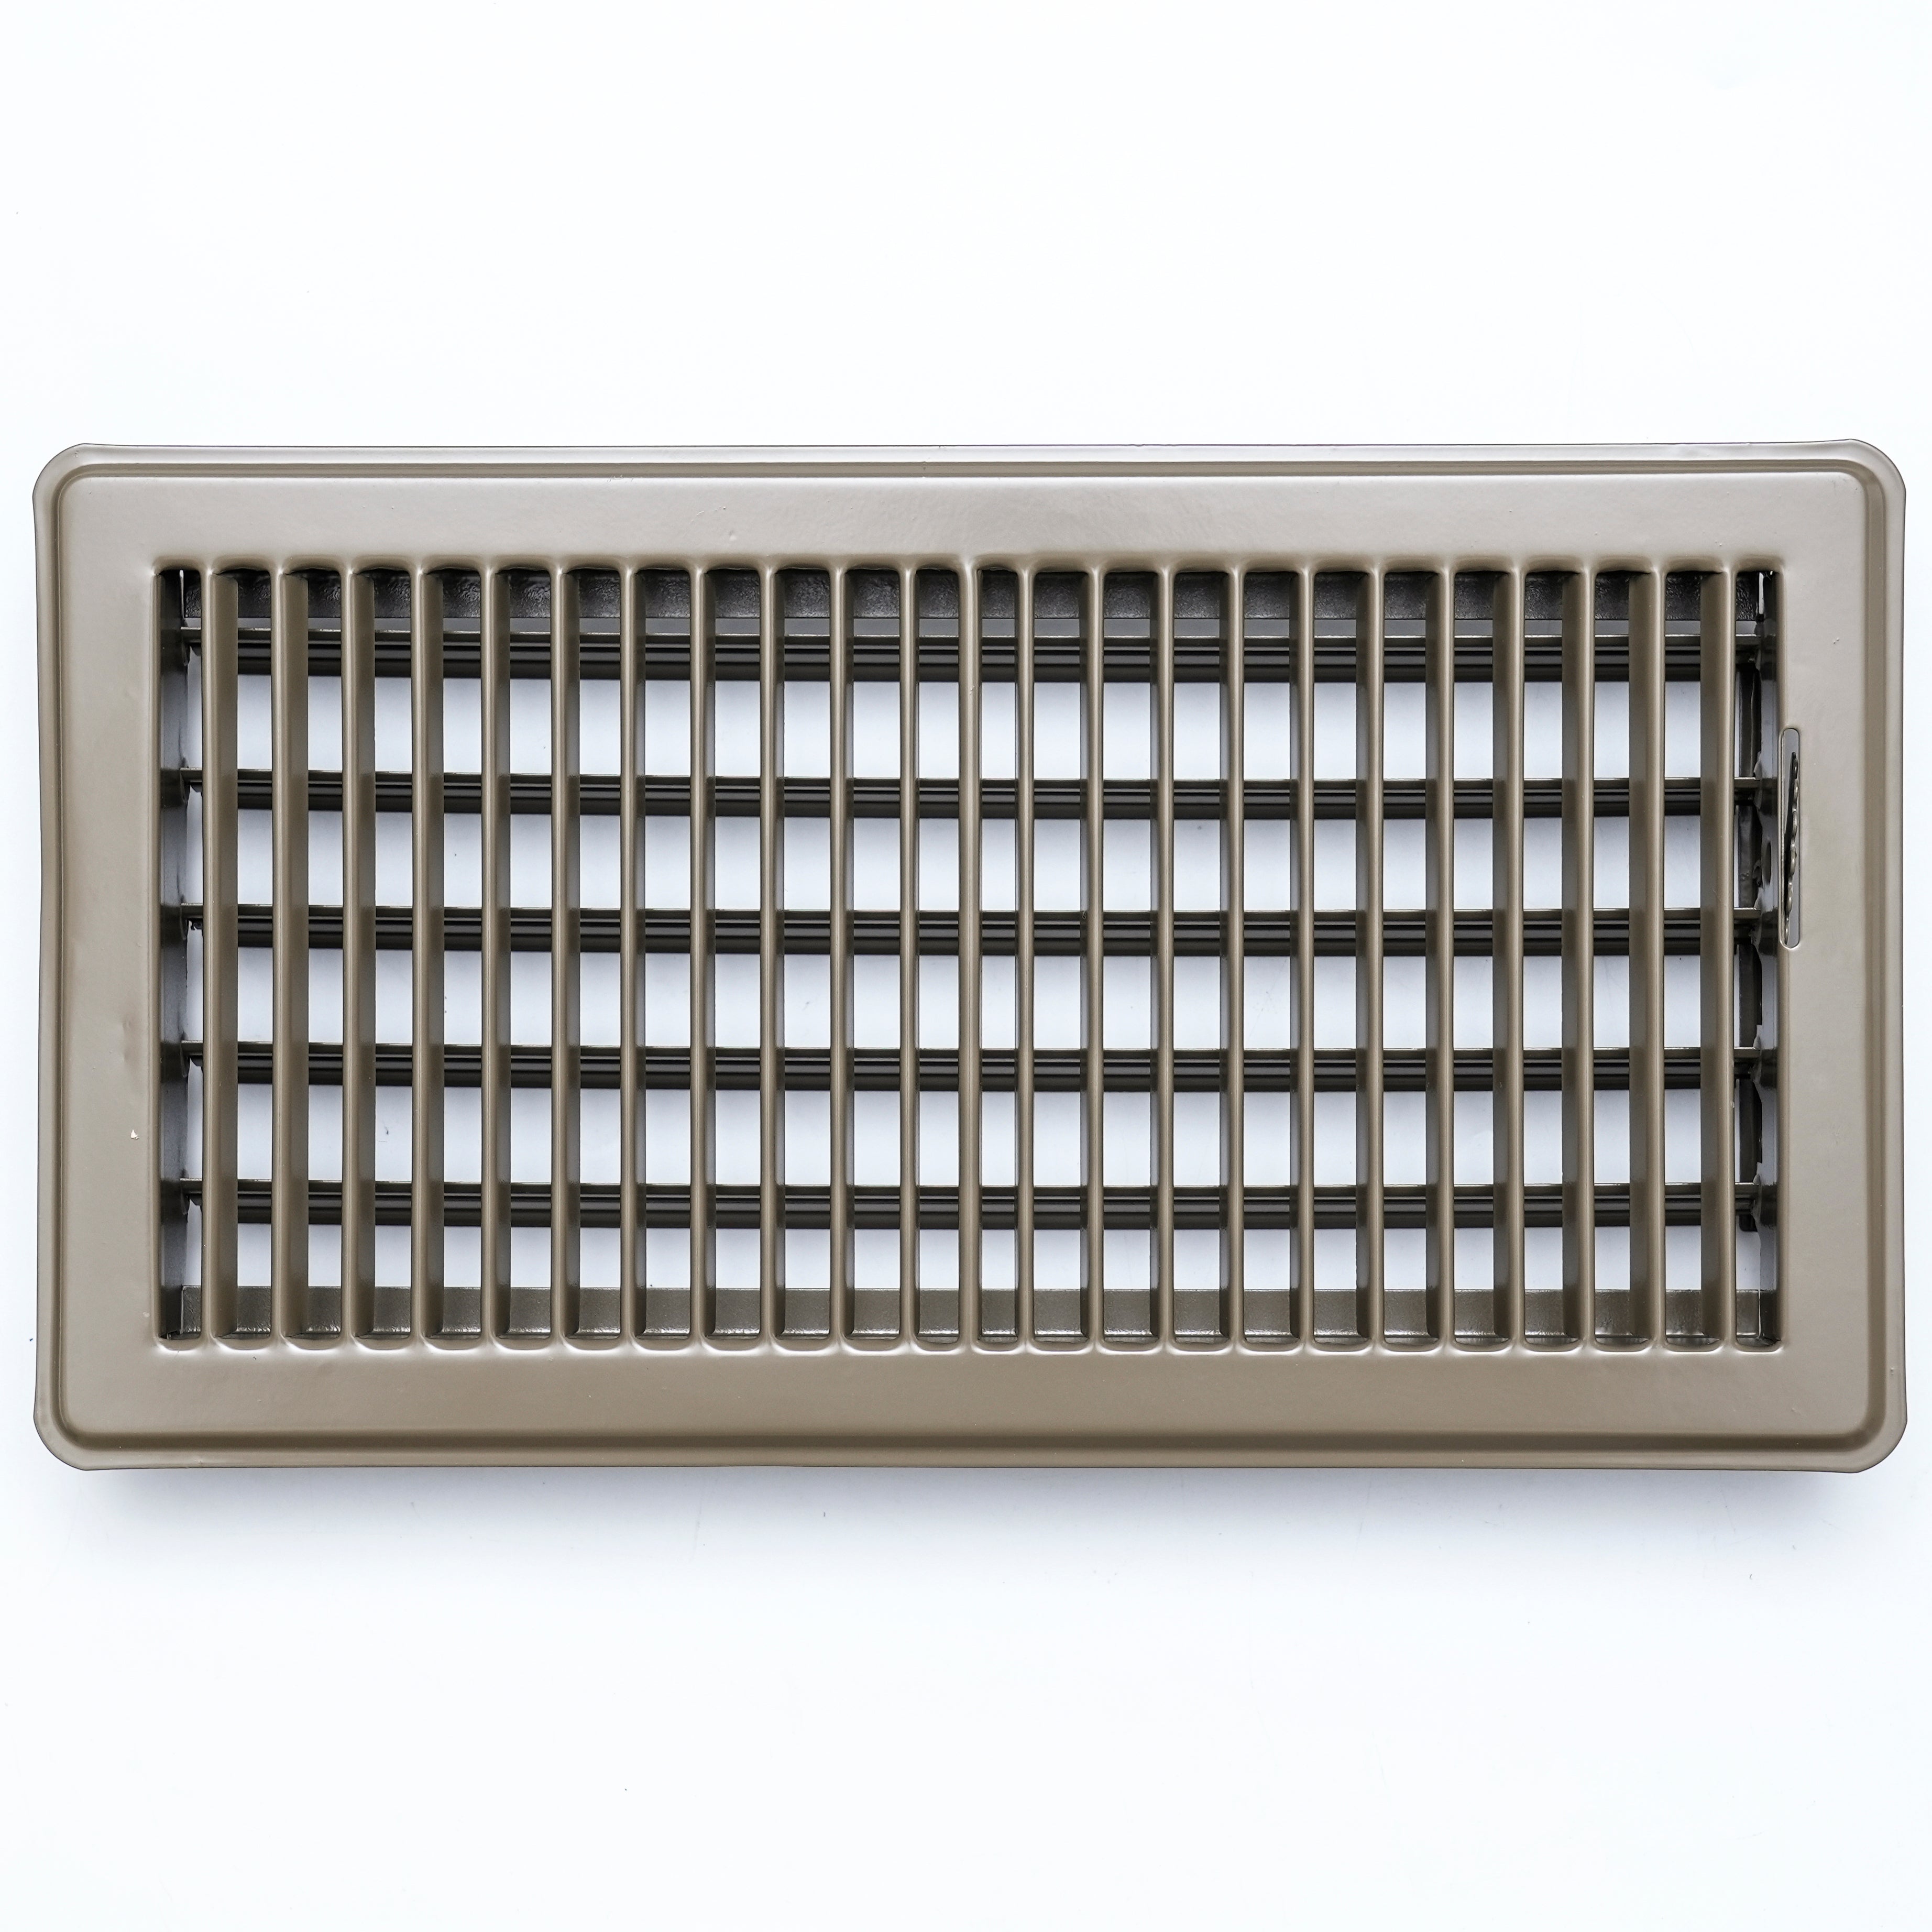 airgrilles 6" x 12" floor register with louvered design heavy duty walkable design with damper floor vent grille easy to adjust air supply lever brown hnd-flg-br-6x12  1